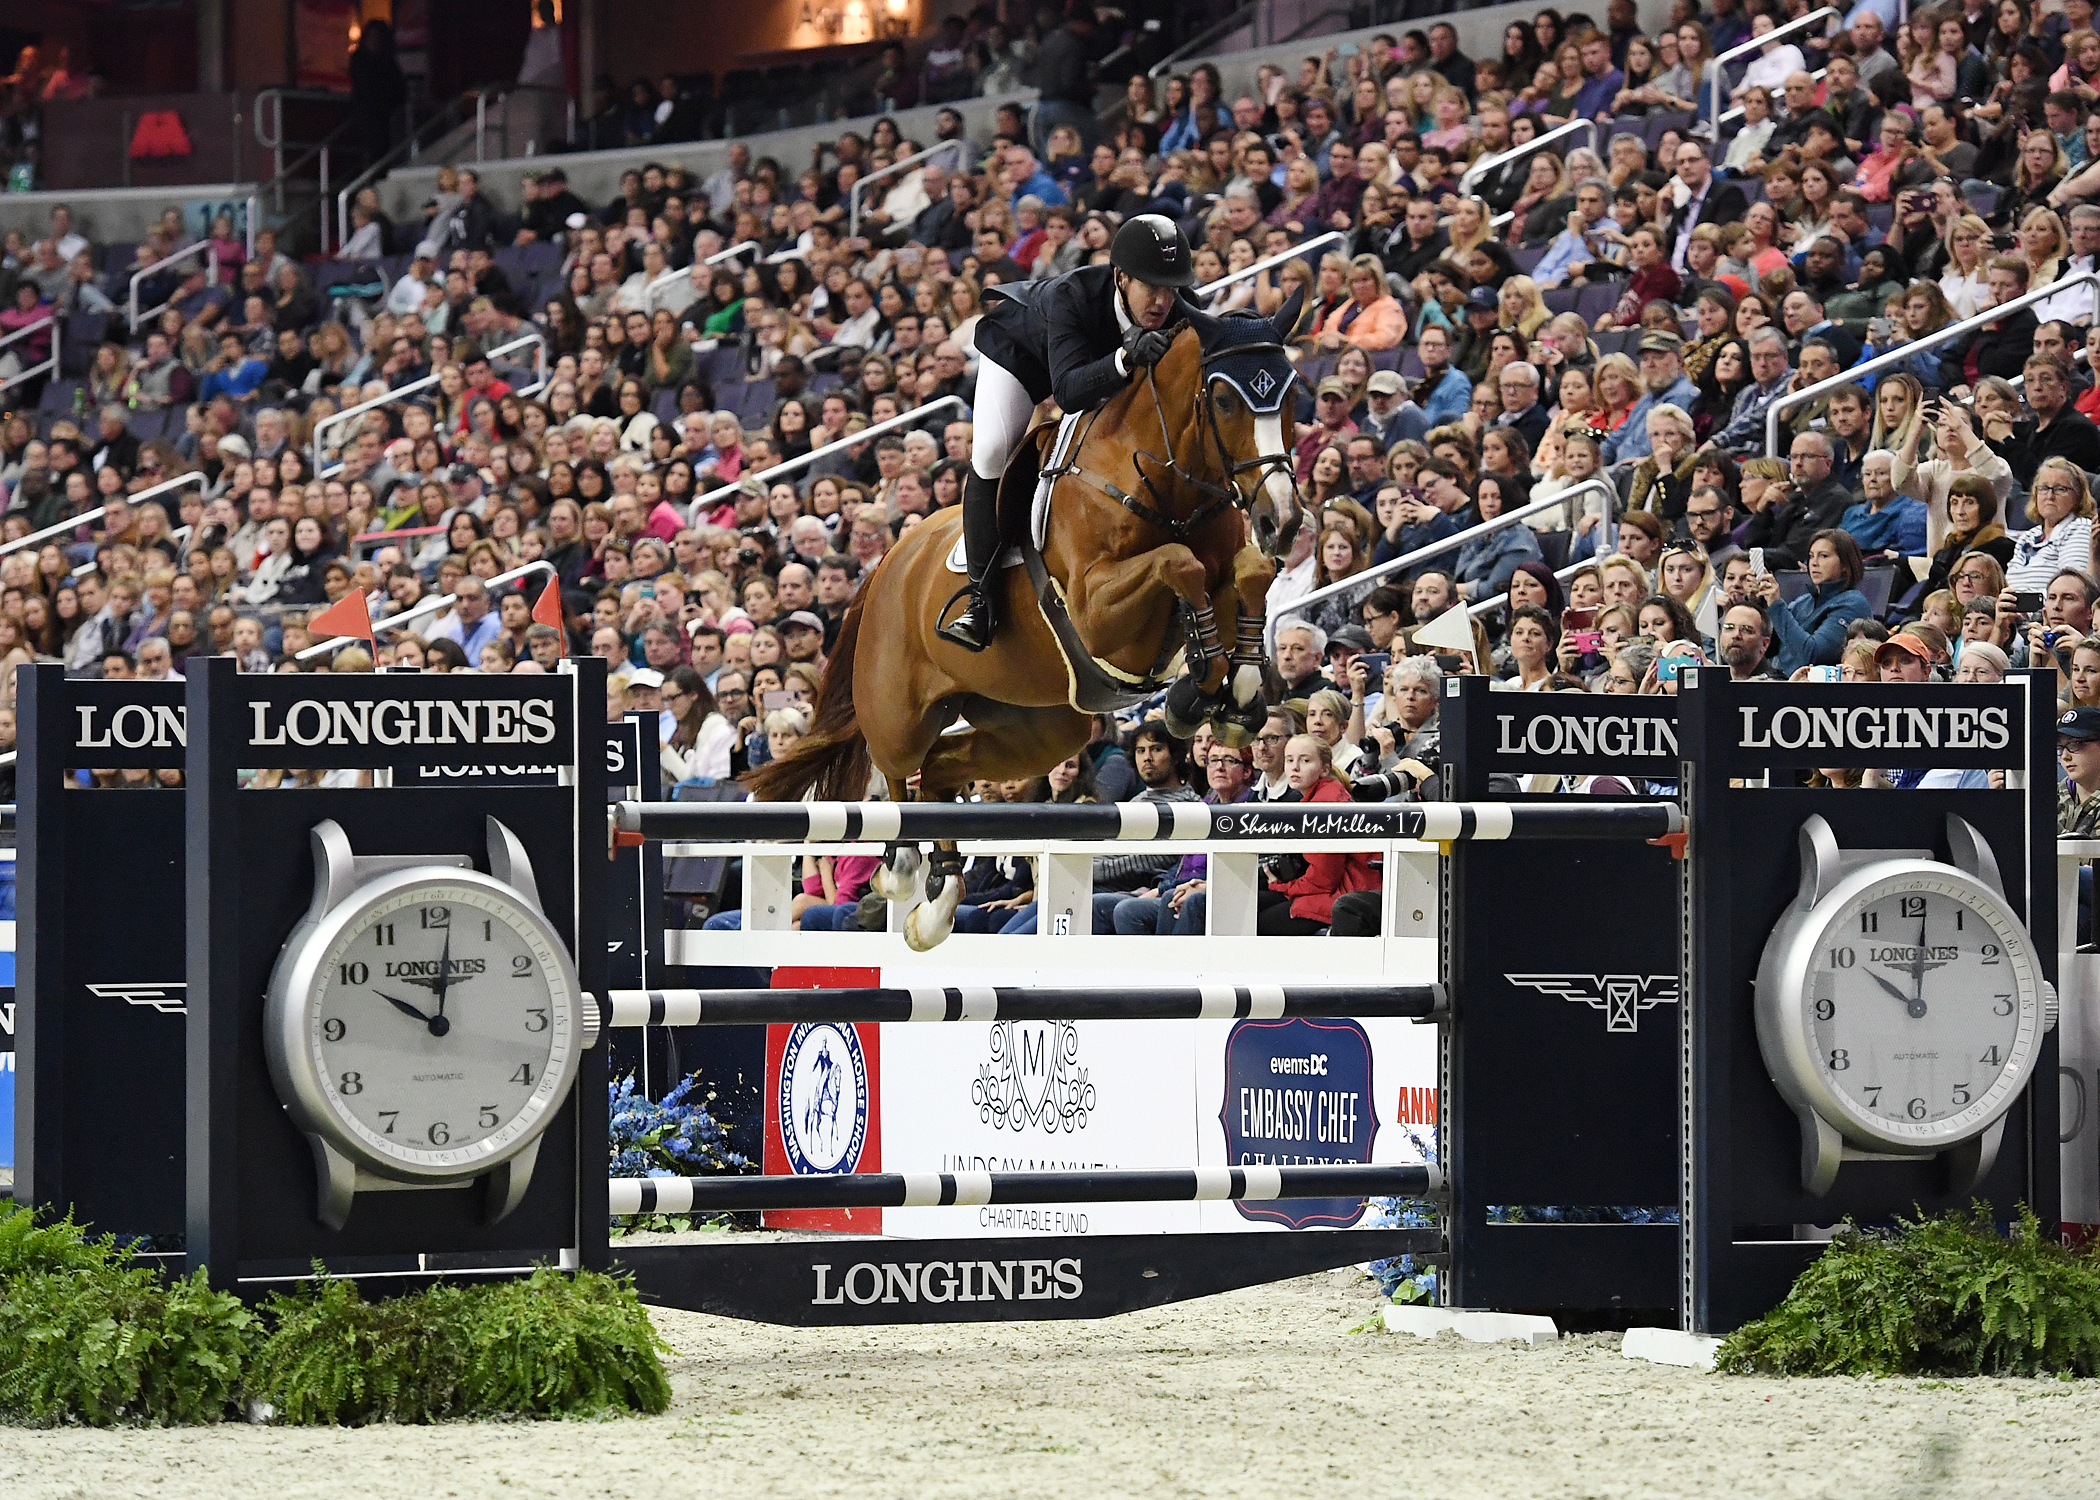 2018 FEI World Equestrian Games team gold medalist McLain Ward will compete at the 2018 WIHS. Photo by Shawn McMillen Photography.